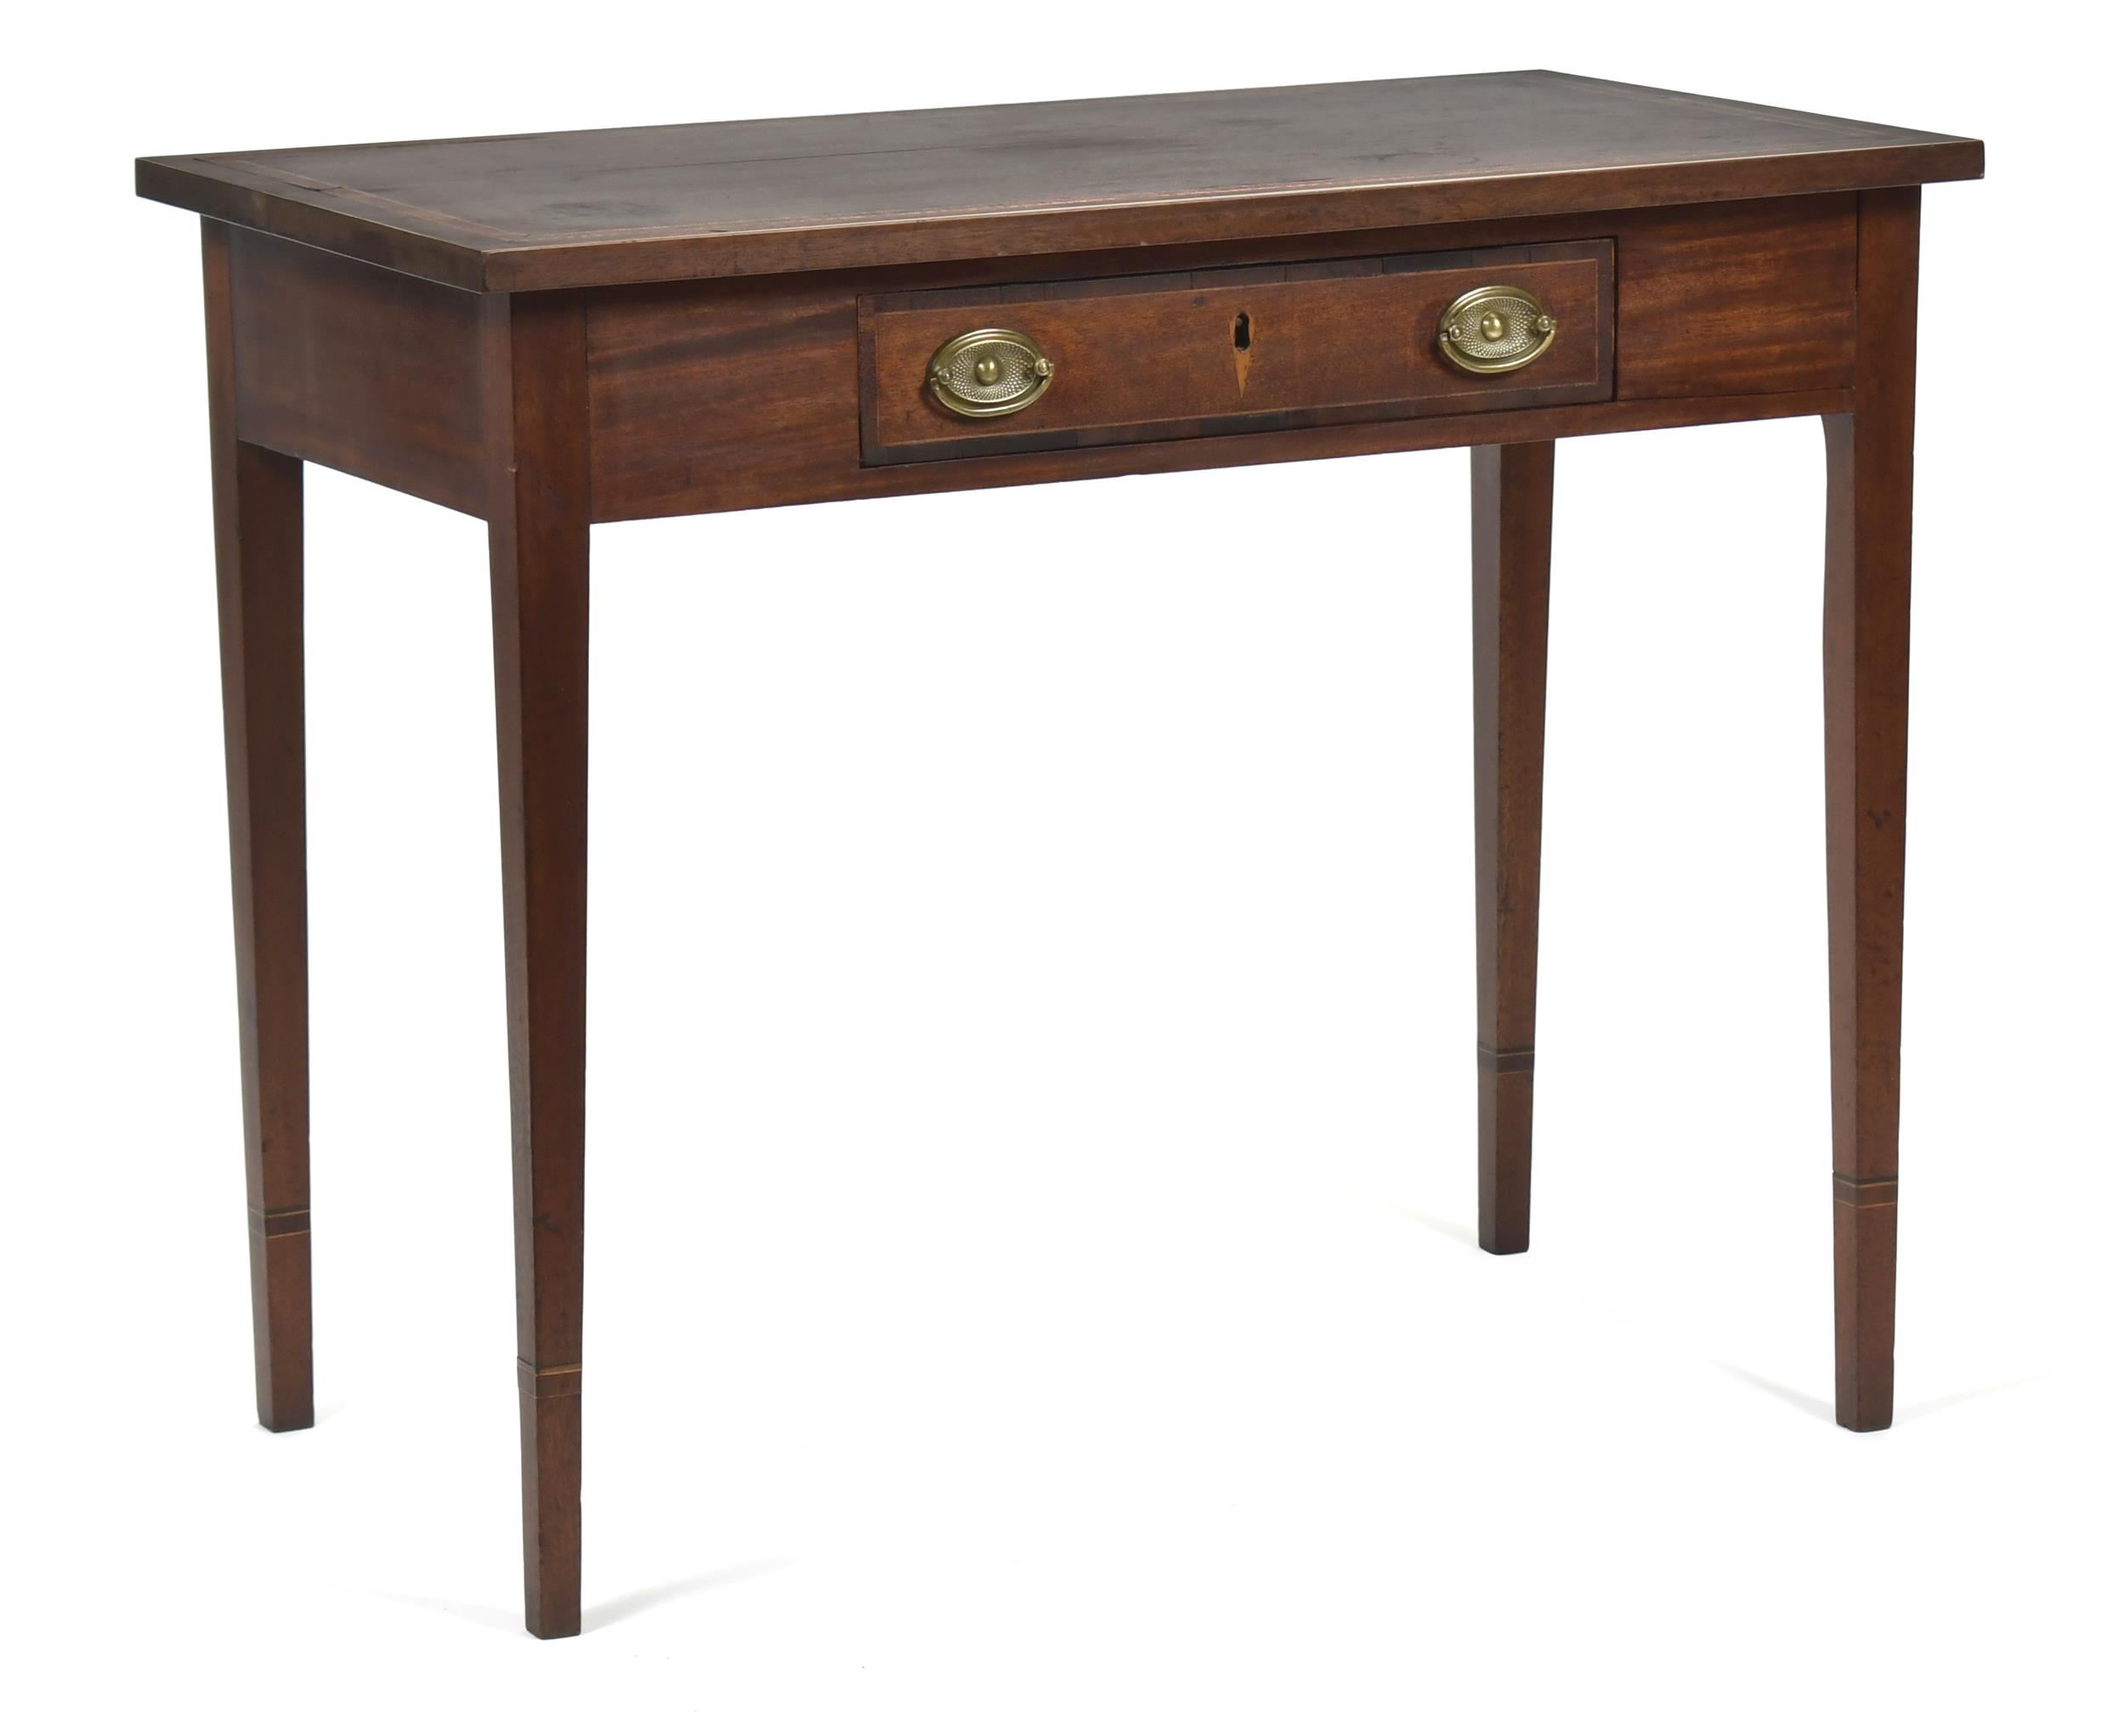 FINE NH FEDERAL INLAID SIDE TABLE  3ab04e